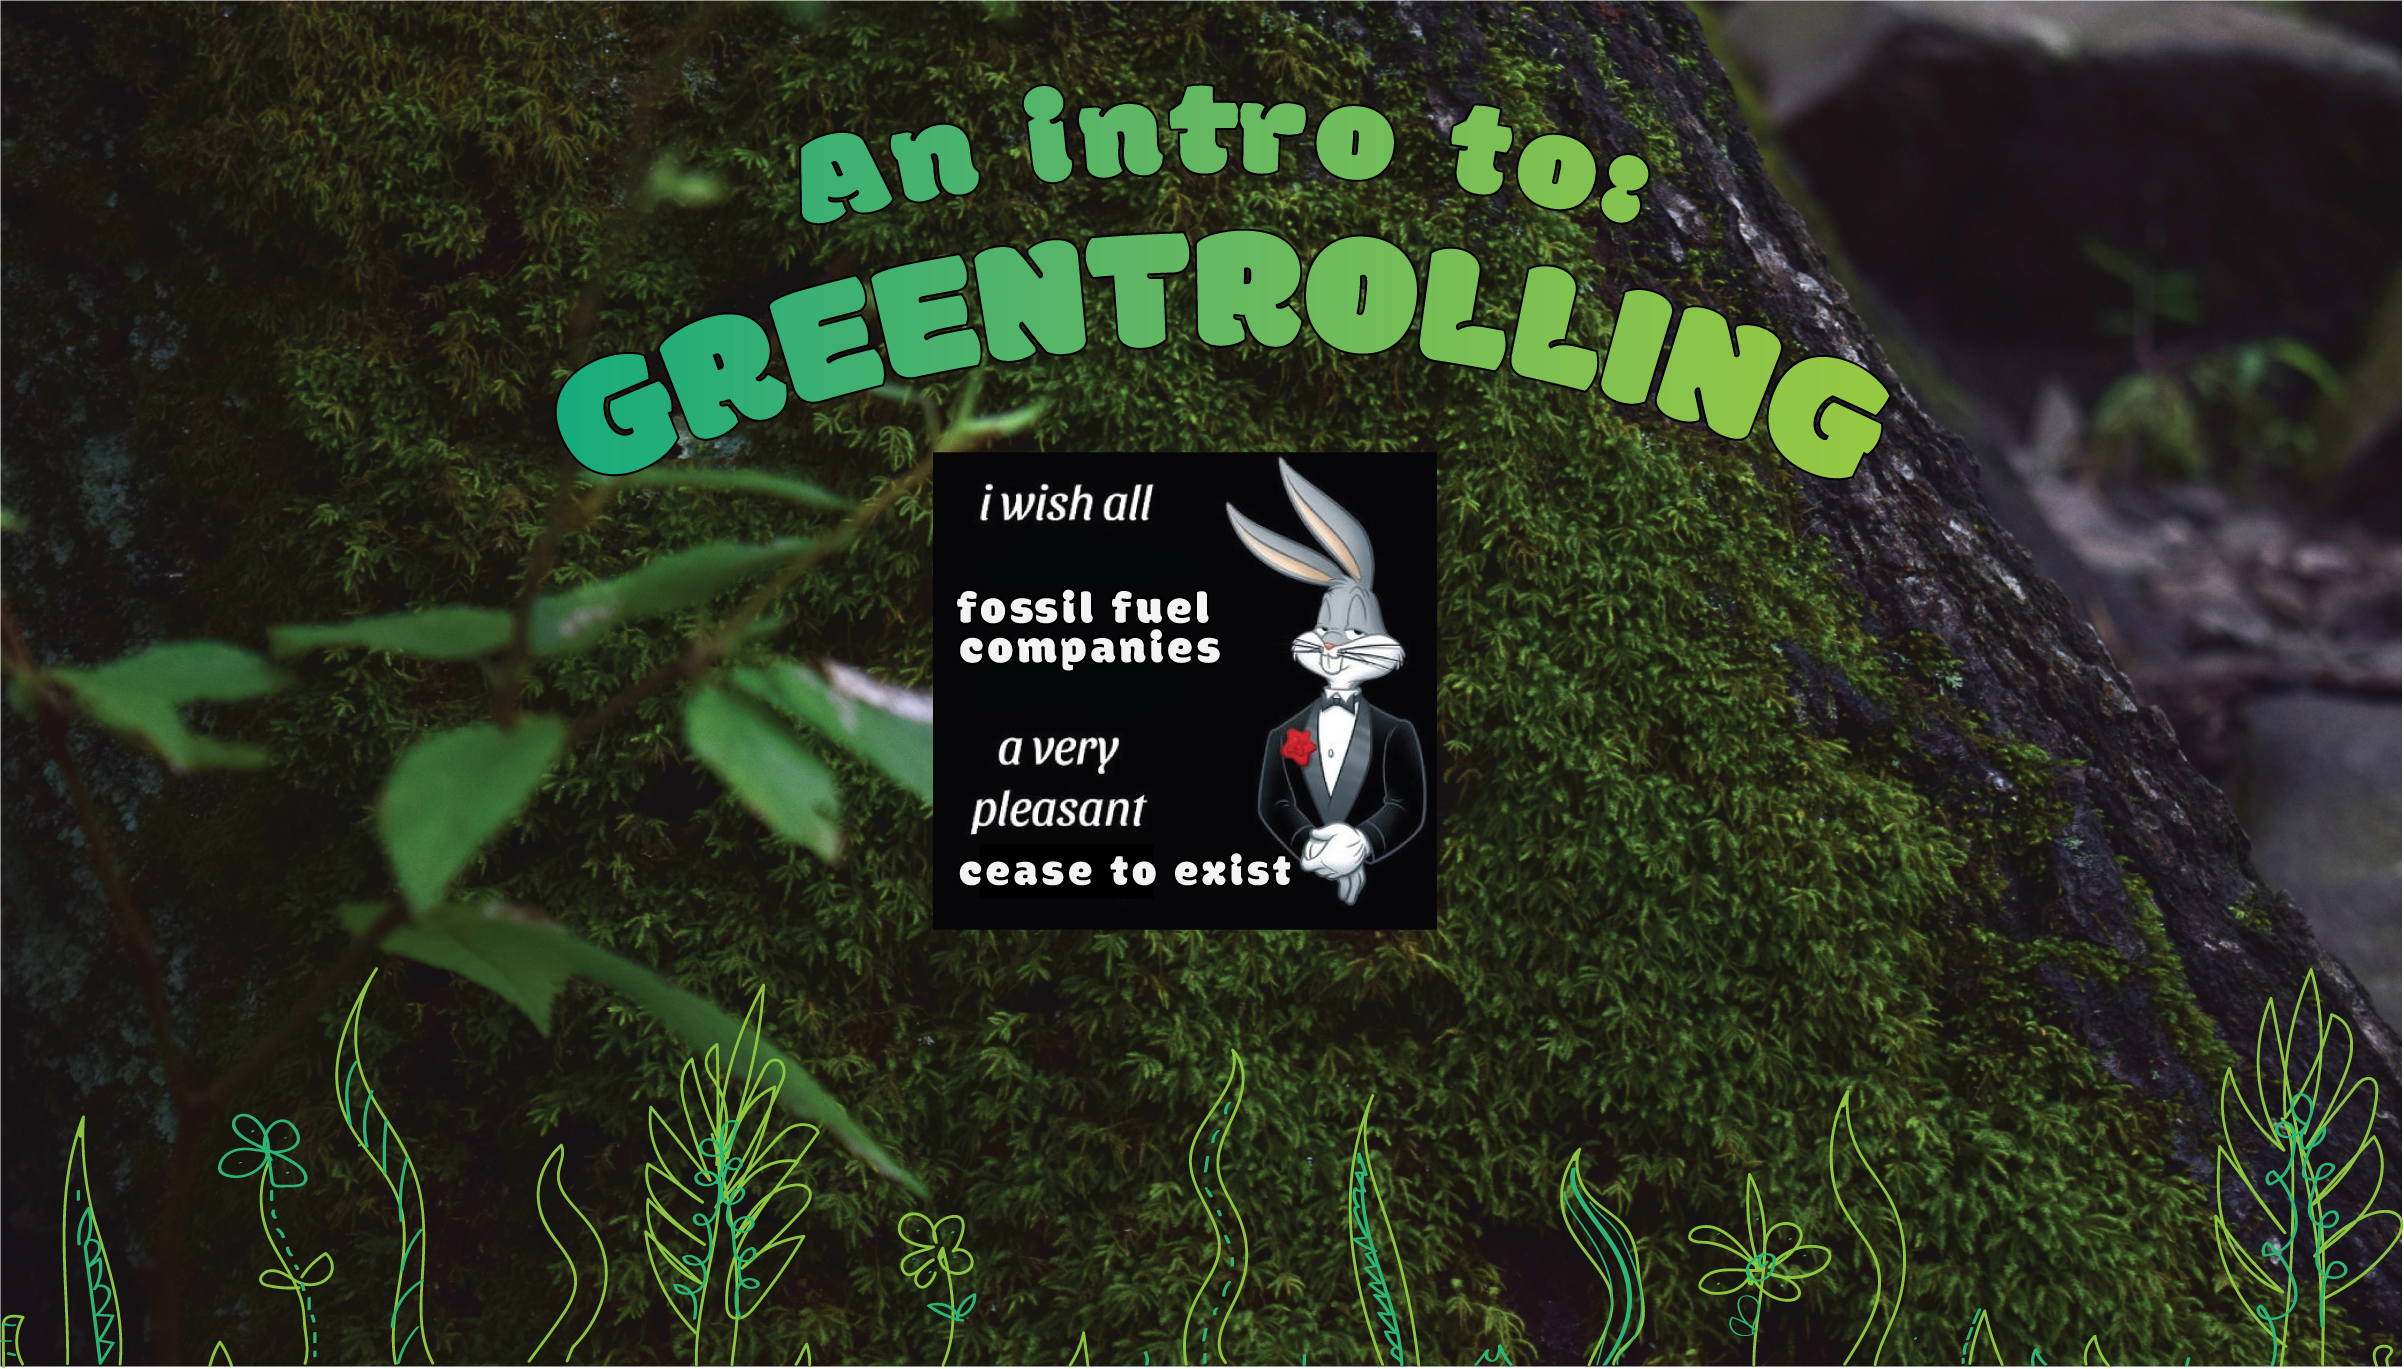 Title: An intro to: Greentrolling. Meme at center of image: Bug Bunny in tuxedo next to words: "I wish all fossil fuel companies a very pleasant cease to exist"